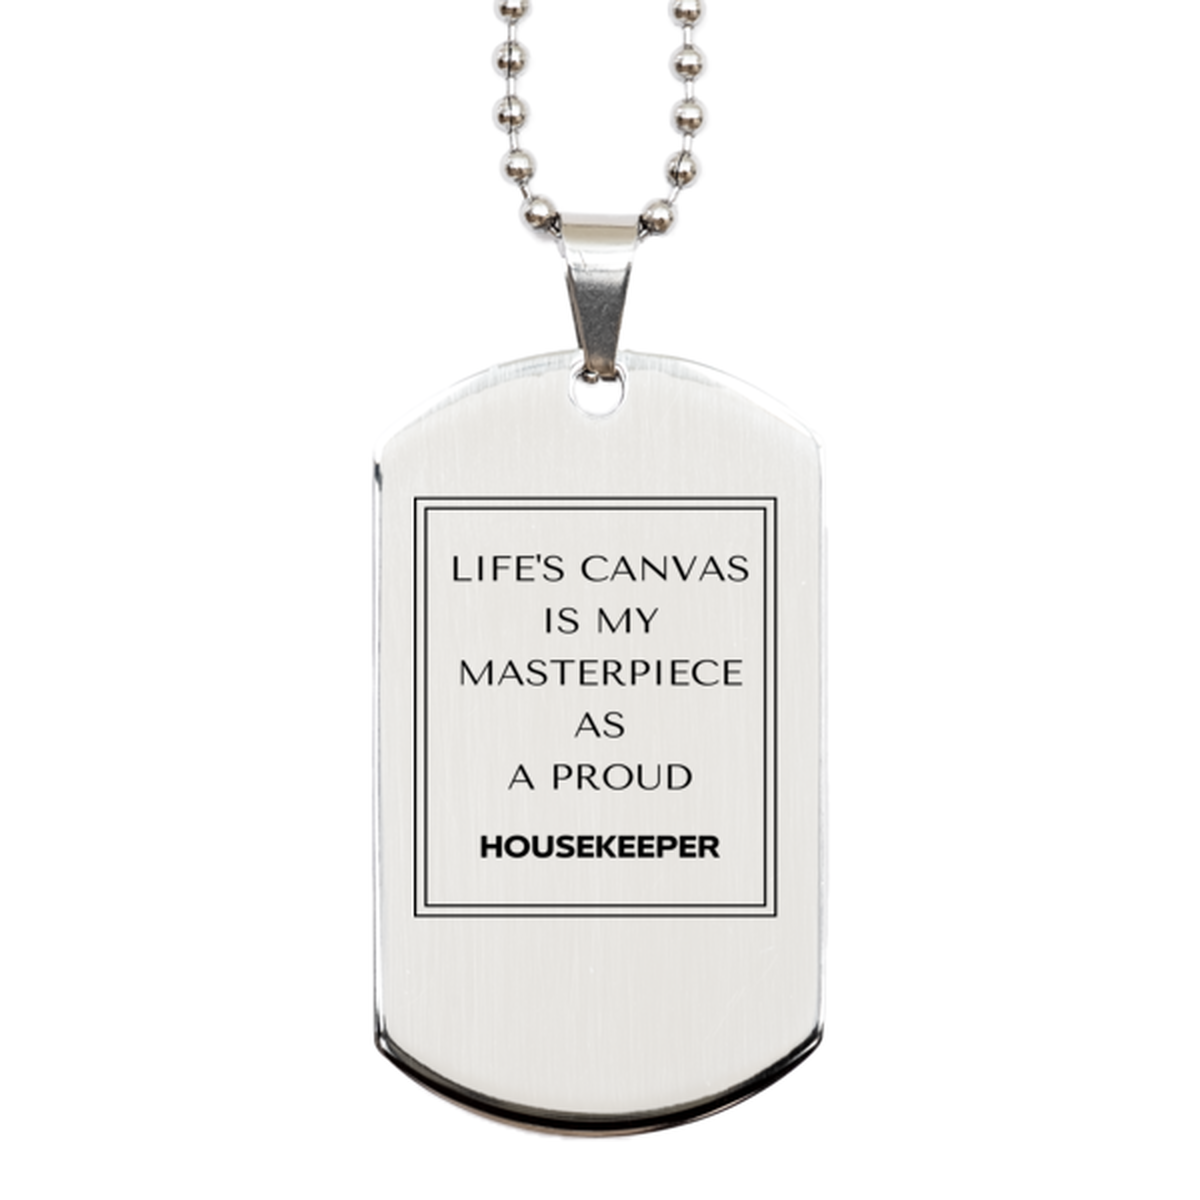 Proud Housekeeper Gifts, Life's canvas is my masterpiece, Epic Birthday Christmas Unique Silver Dog Tag For Housekeeper, Coworkers, Men, Women, Friends